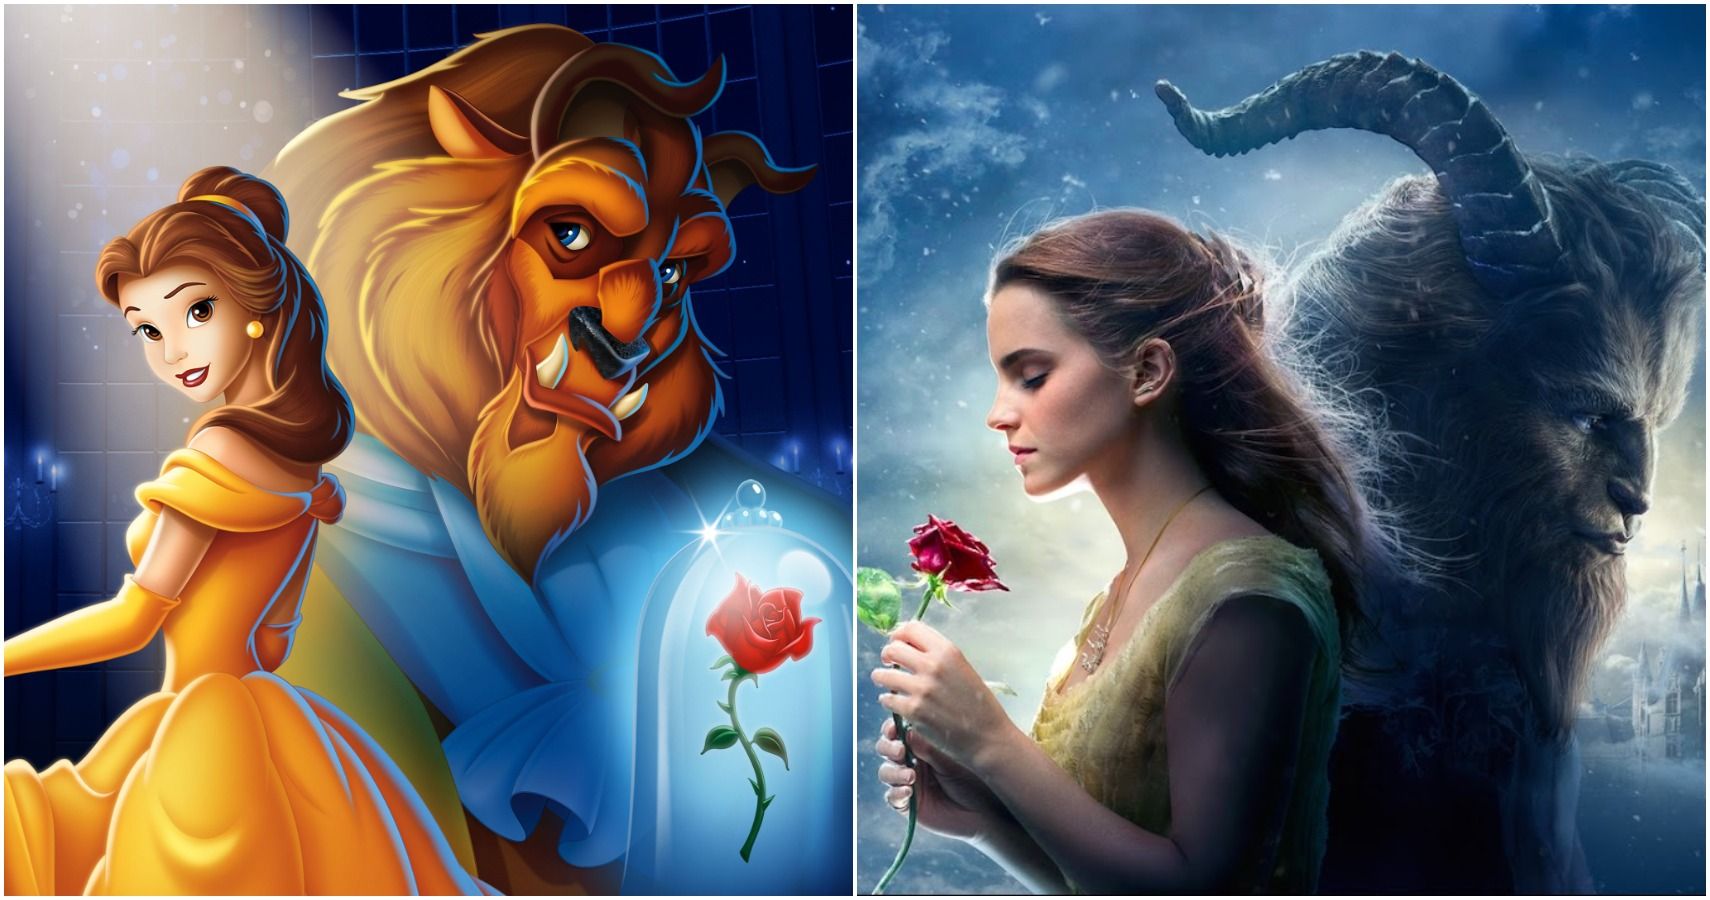 6 Reasons The Beauty And The Beast Live Action Is The Best 4 Reasons It S The Original